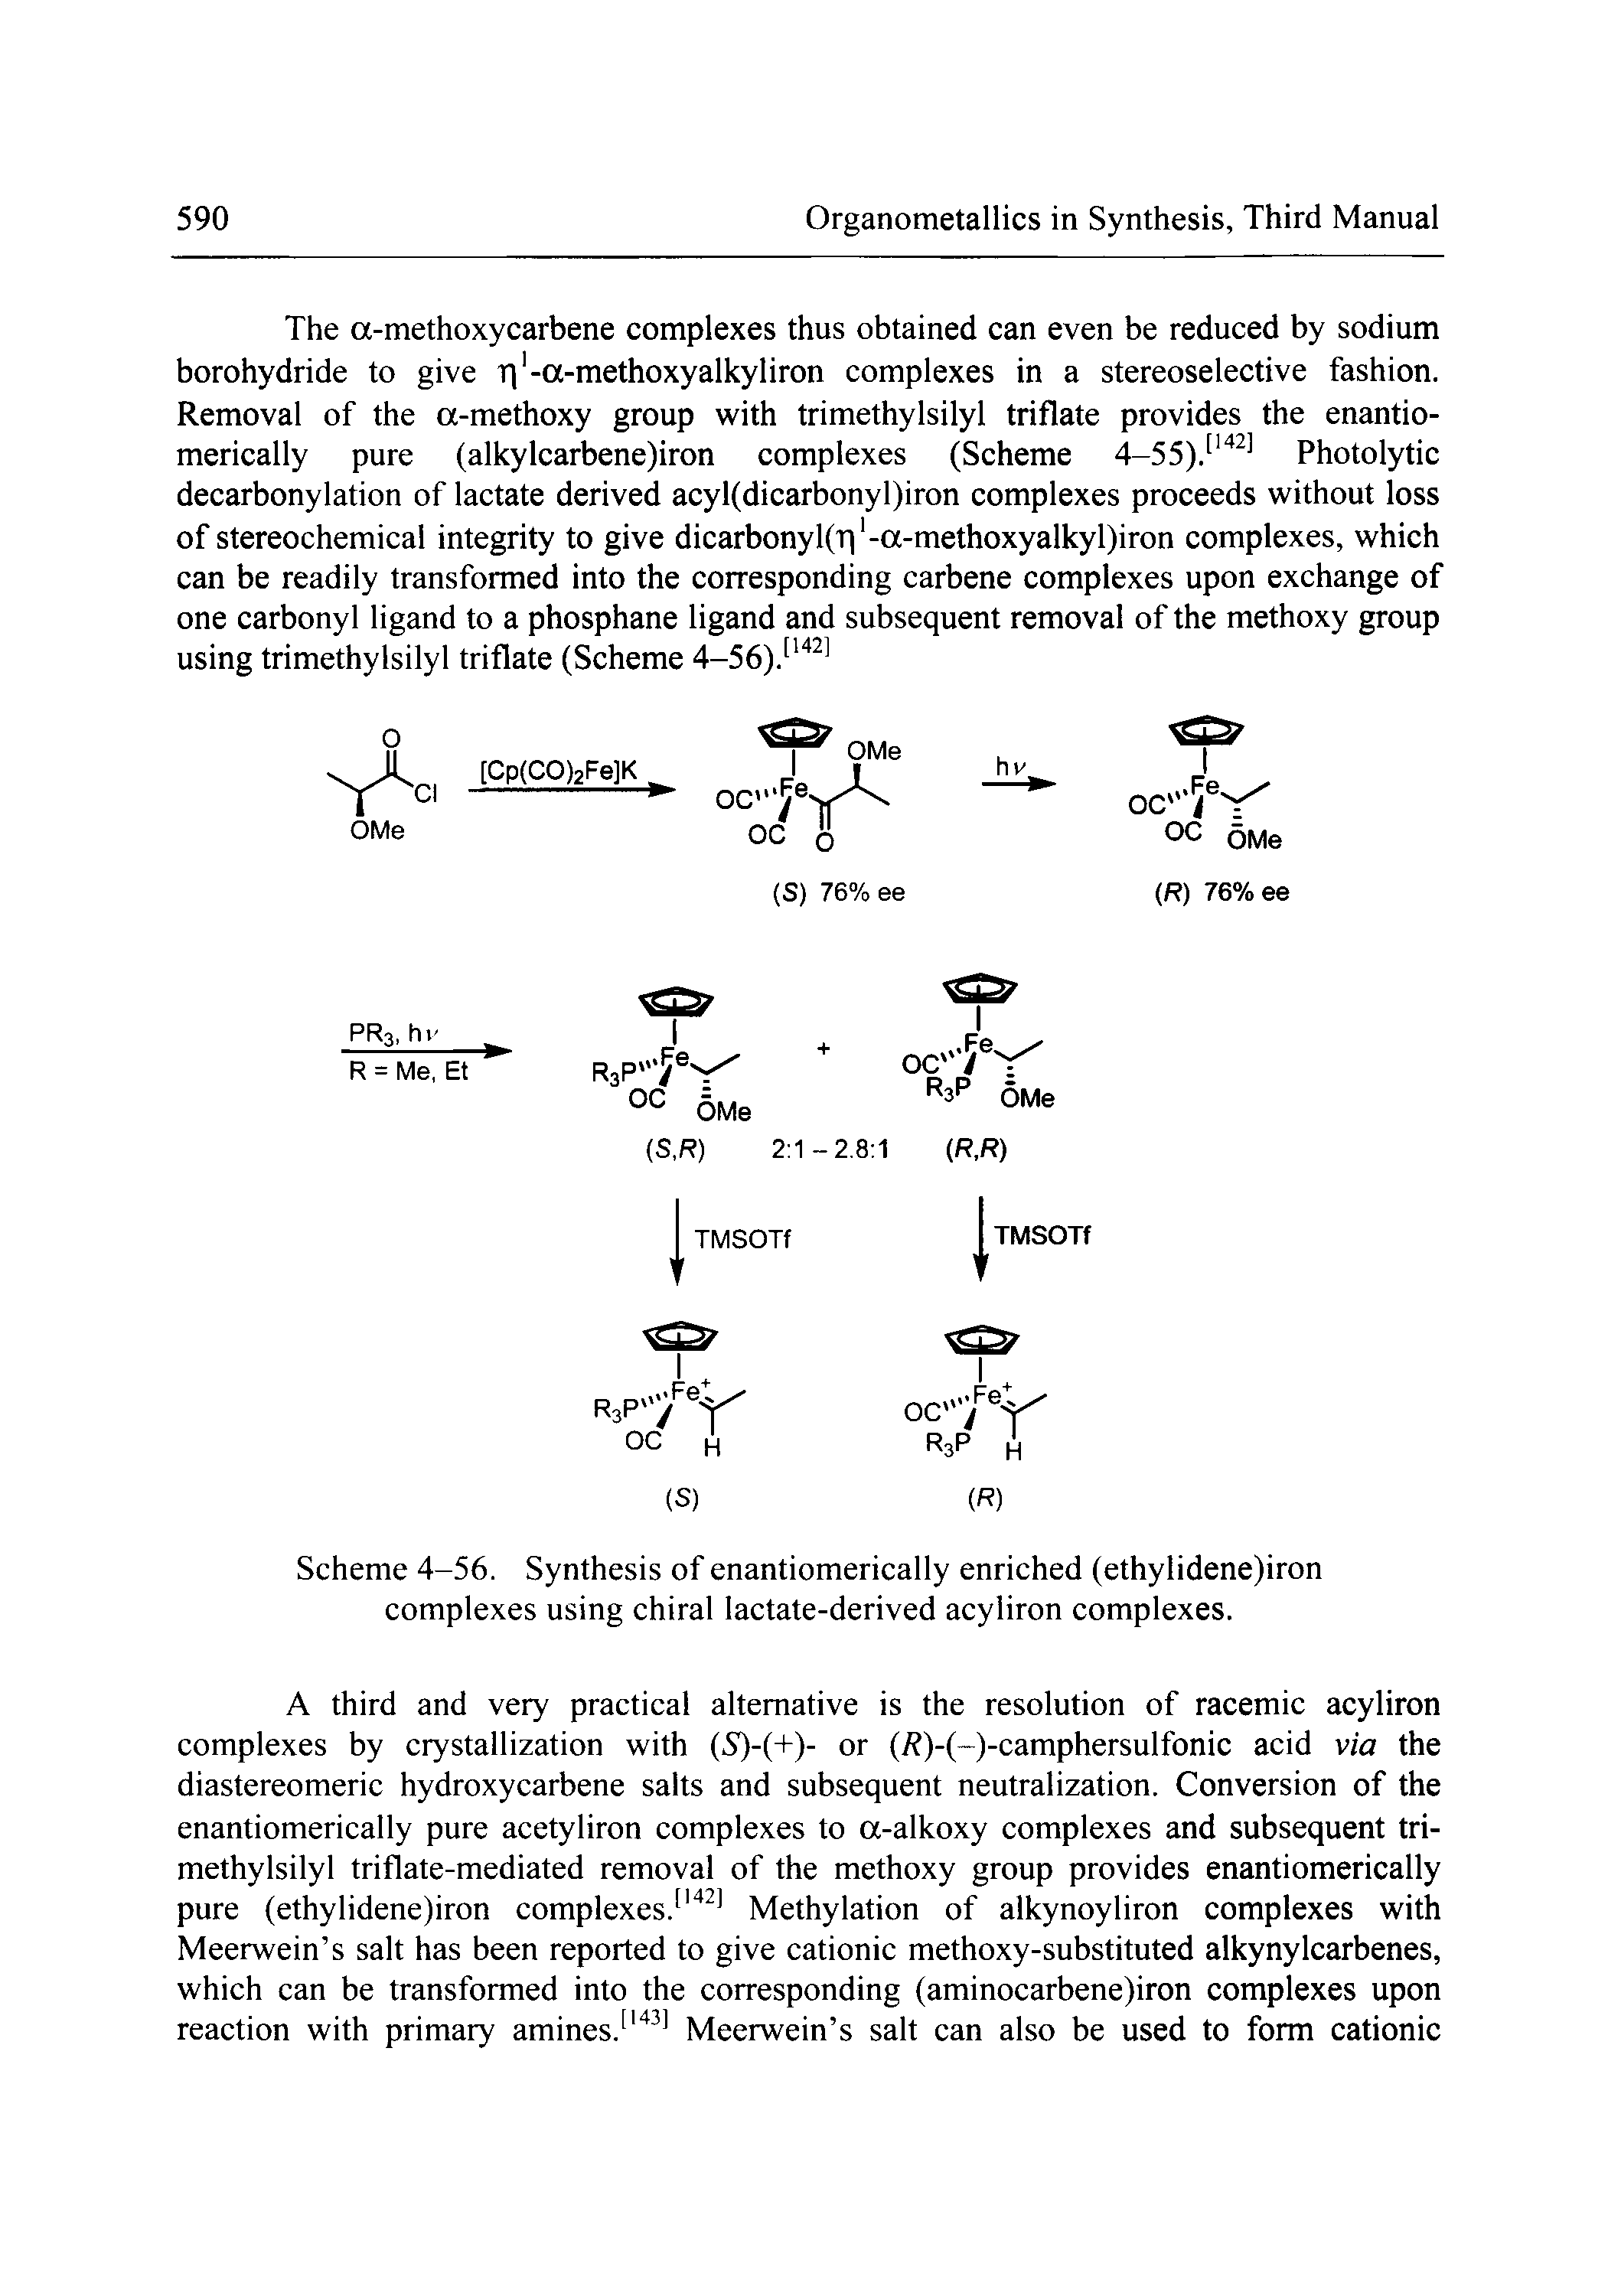 Scheme 4-56. Synthesis of enantiomerically enriched (ethylidene)iron complexes using chiral lactate-derived acyliron complexes.